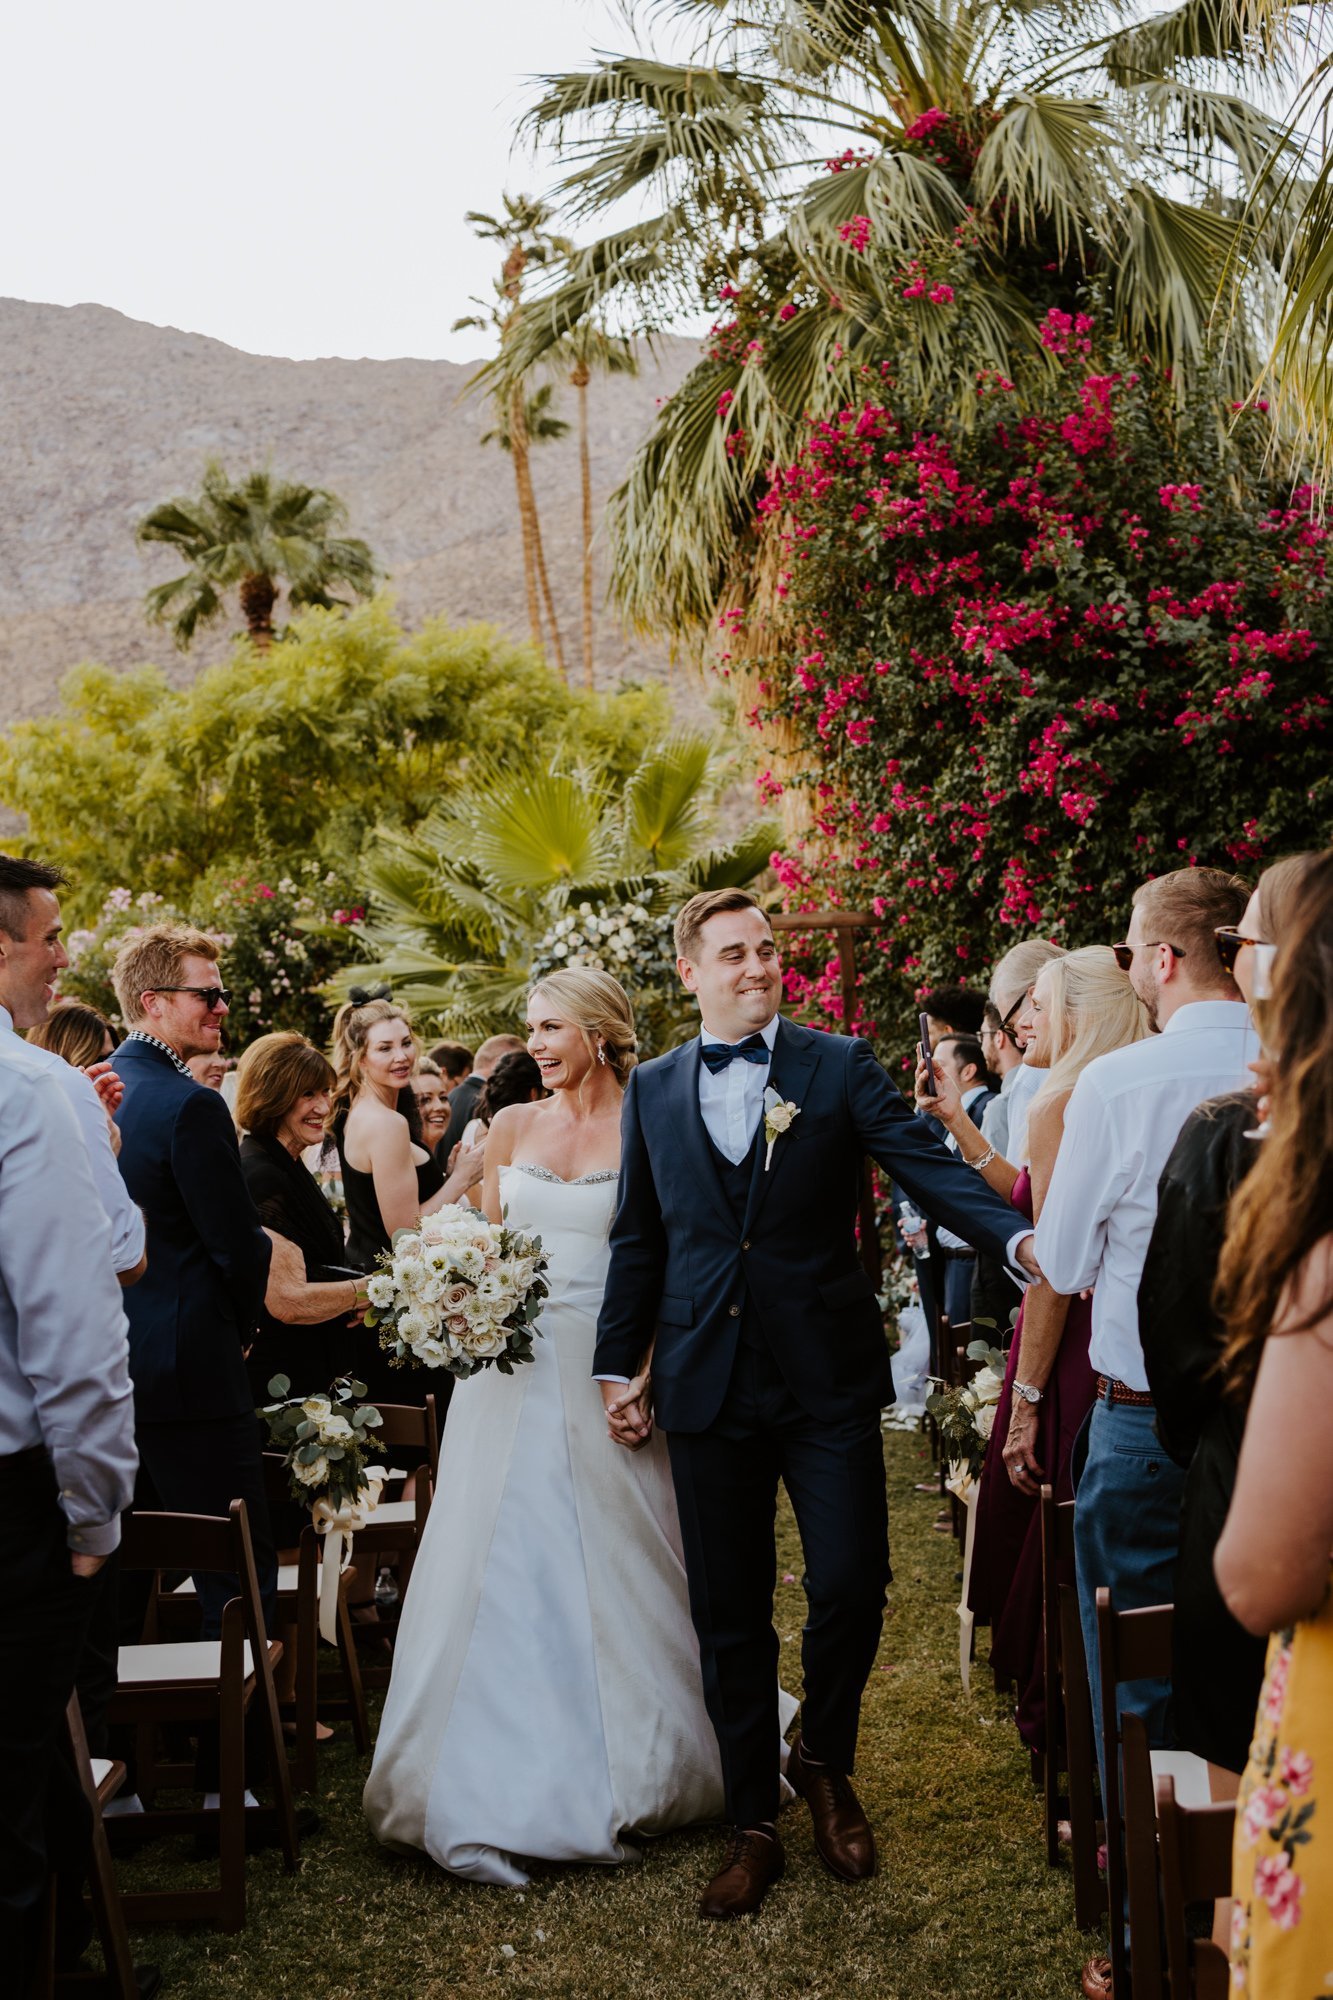 Sunset Wedding ceremony bride and groom walking down the aisle at The O’Donnell House wedding in Palm Springs, vibrant southern california wedding photography by Tida Svy